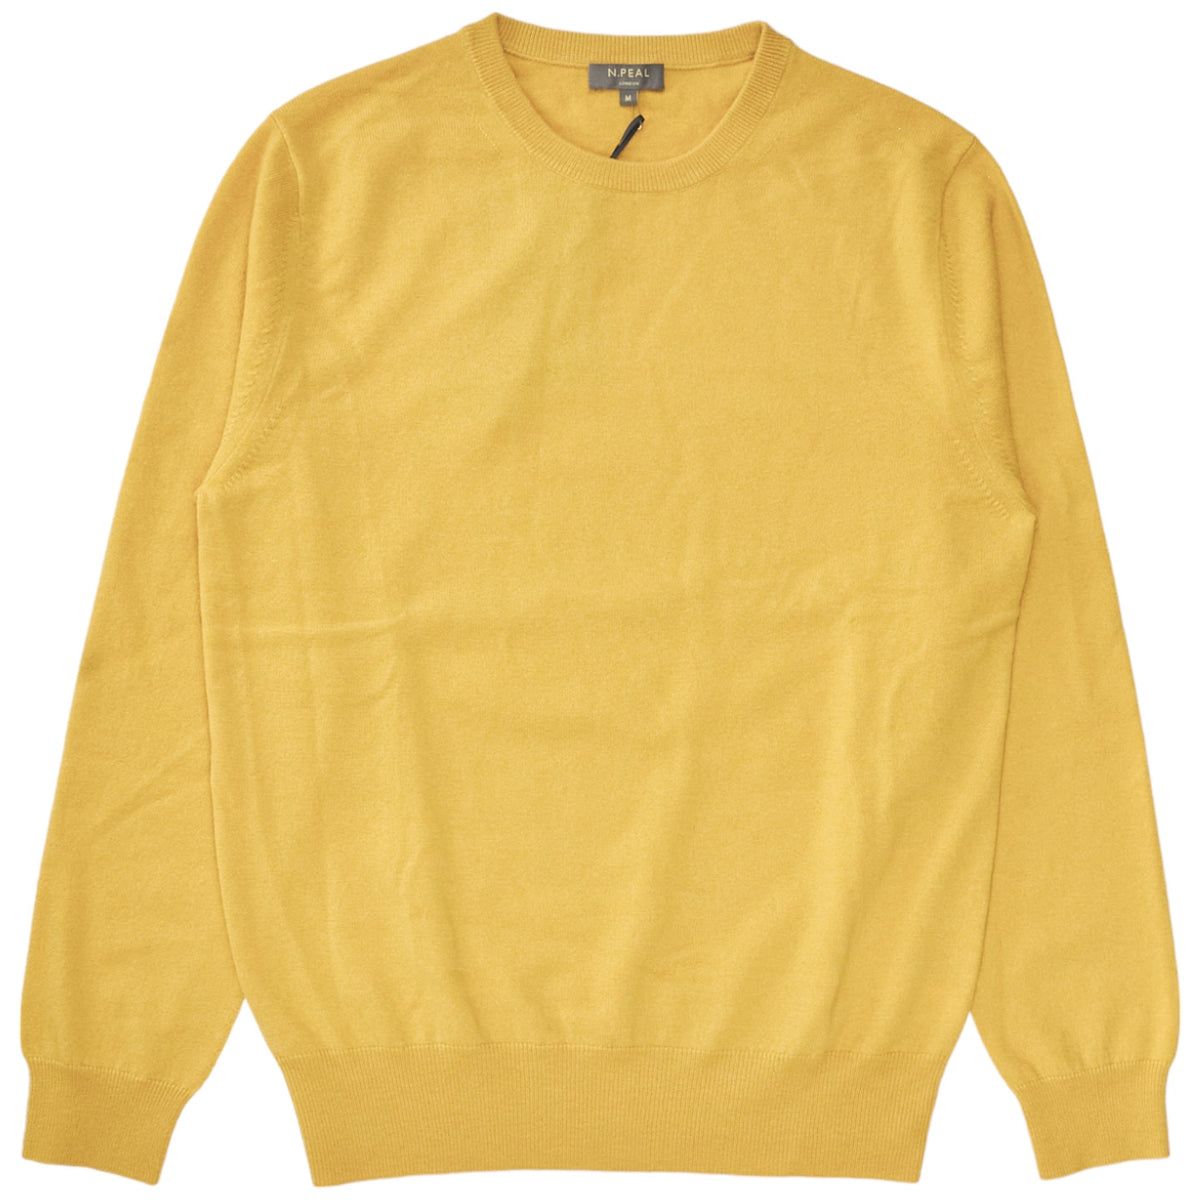 N. Peal Rattan Cashmere Sweater